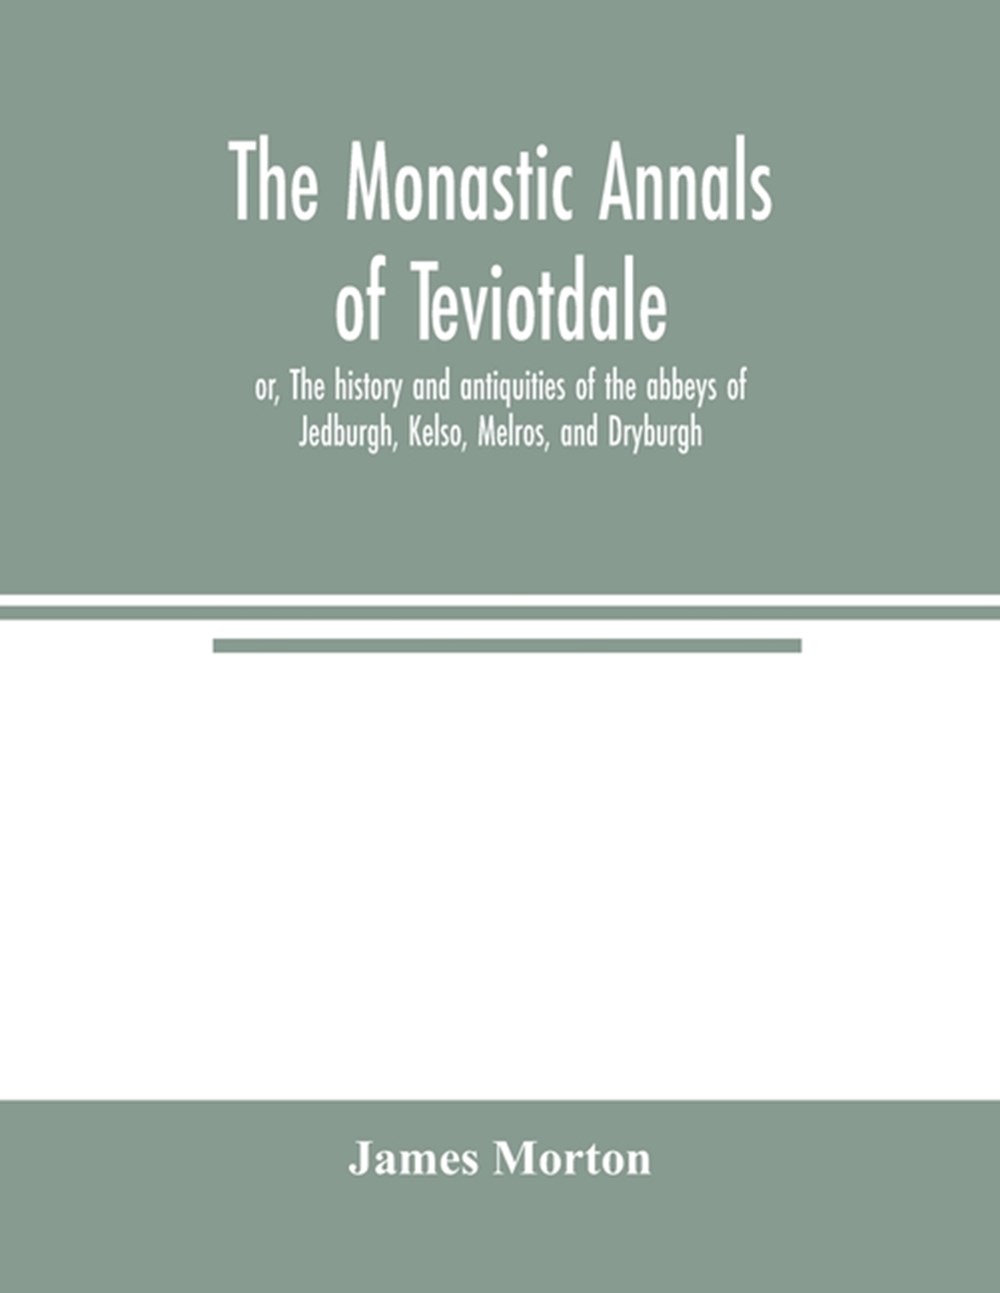 monastic annals of Teviotdale, or, The history and antiquities of the abbeys of Jedburgh, Kelso, Mel